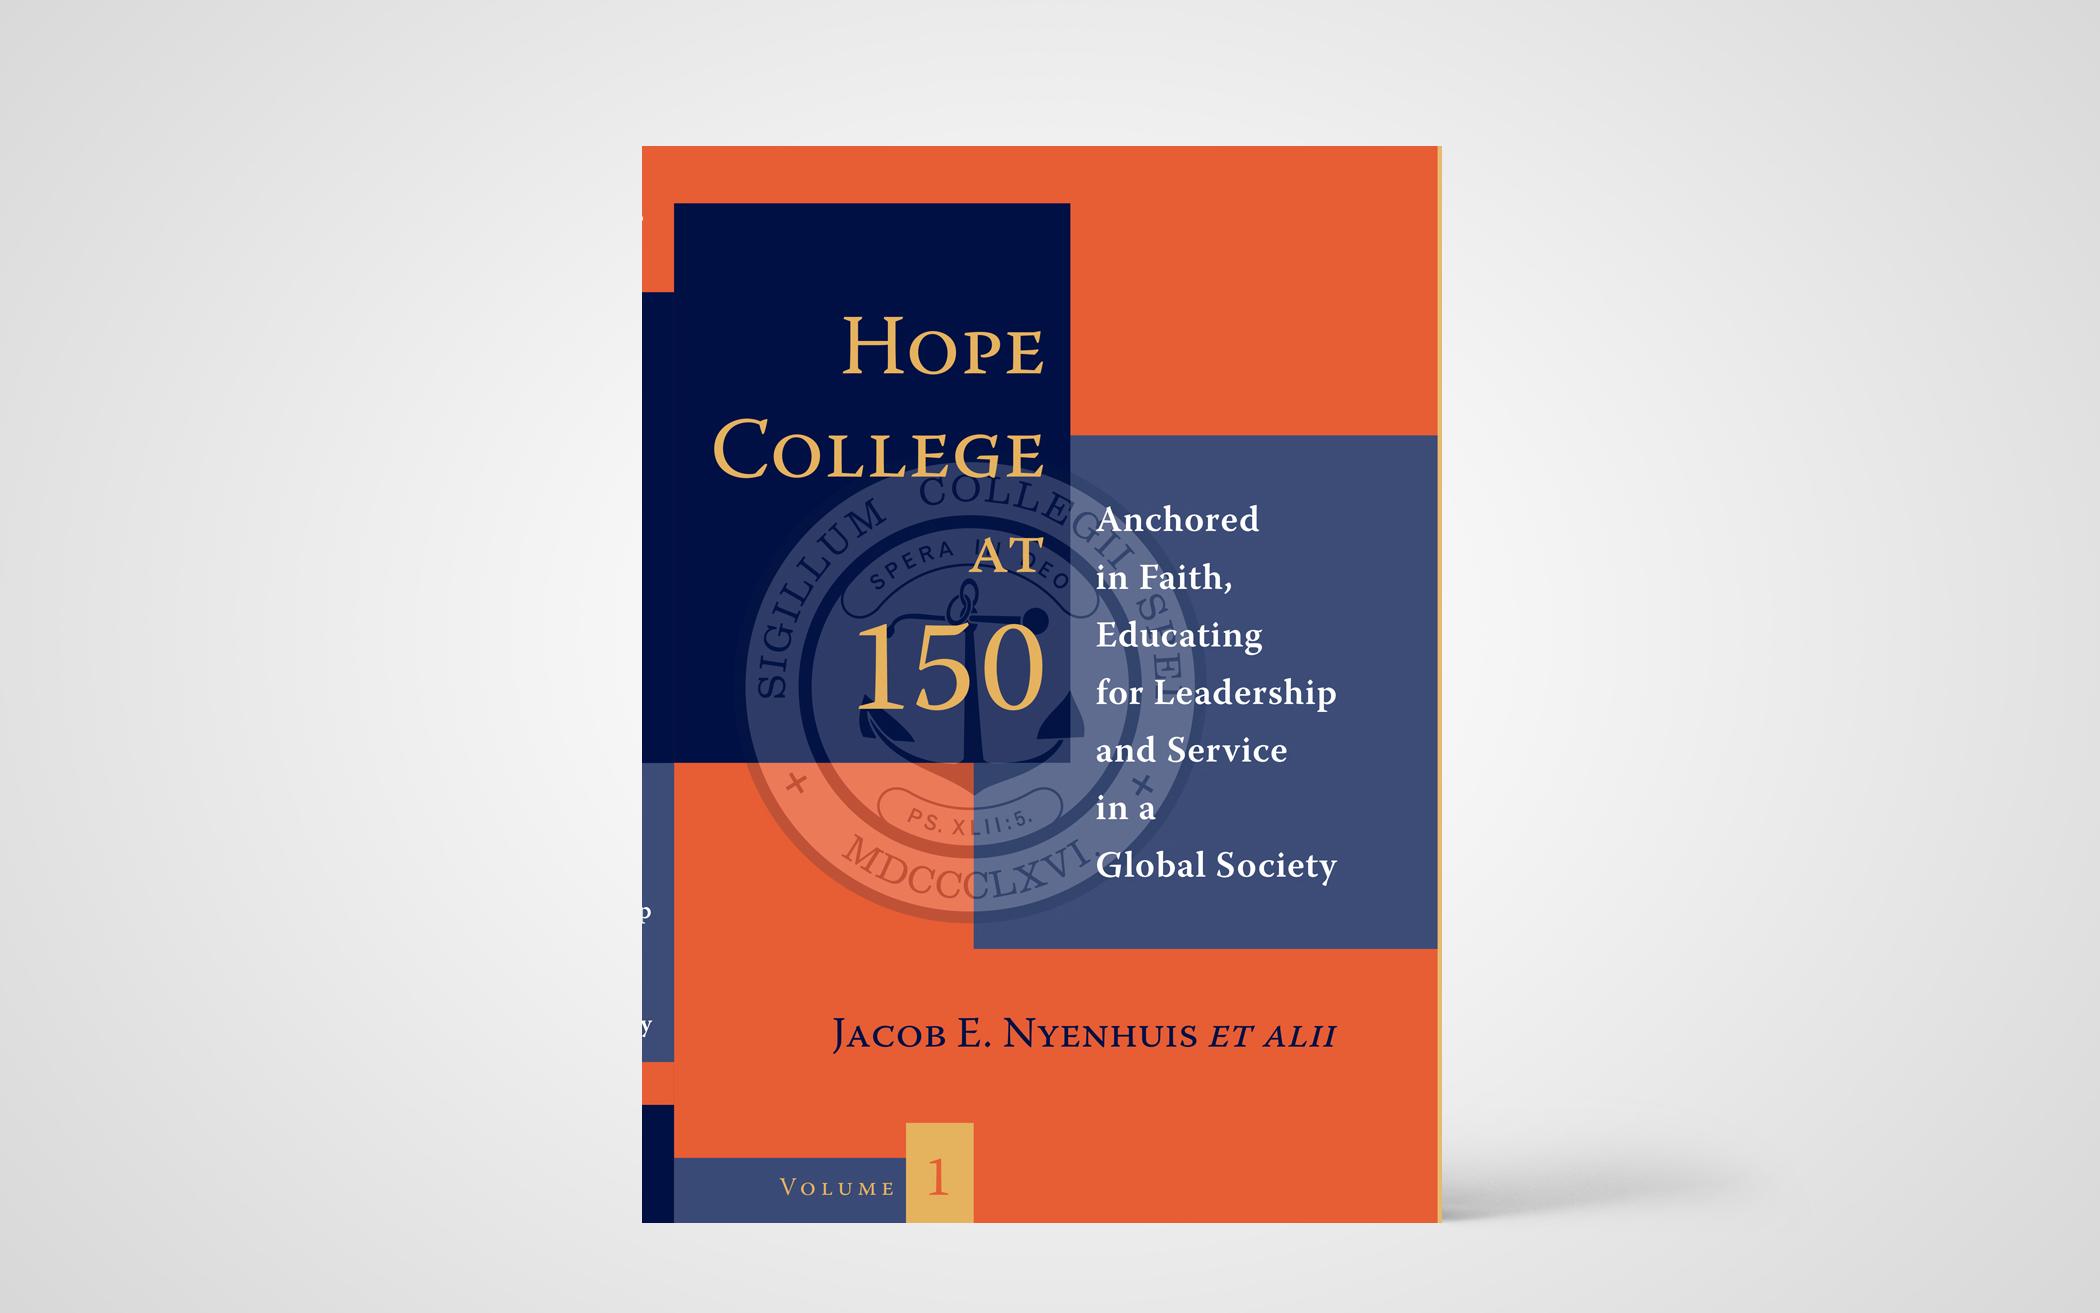 Hope College at 150: Anchored in Faith, Educating for Leadership and Service in a Global Society, 2 Volumes